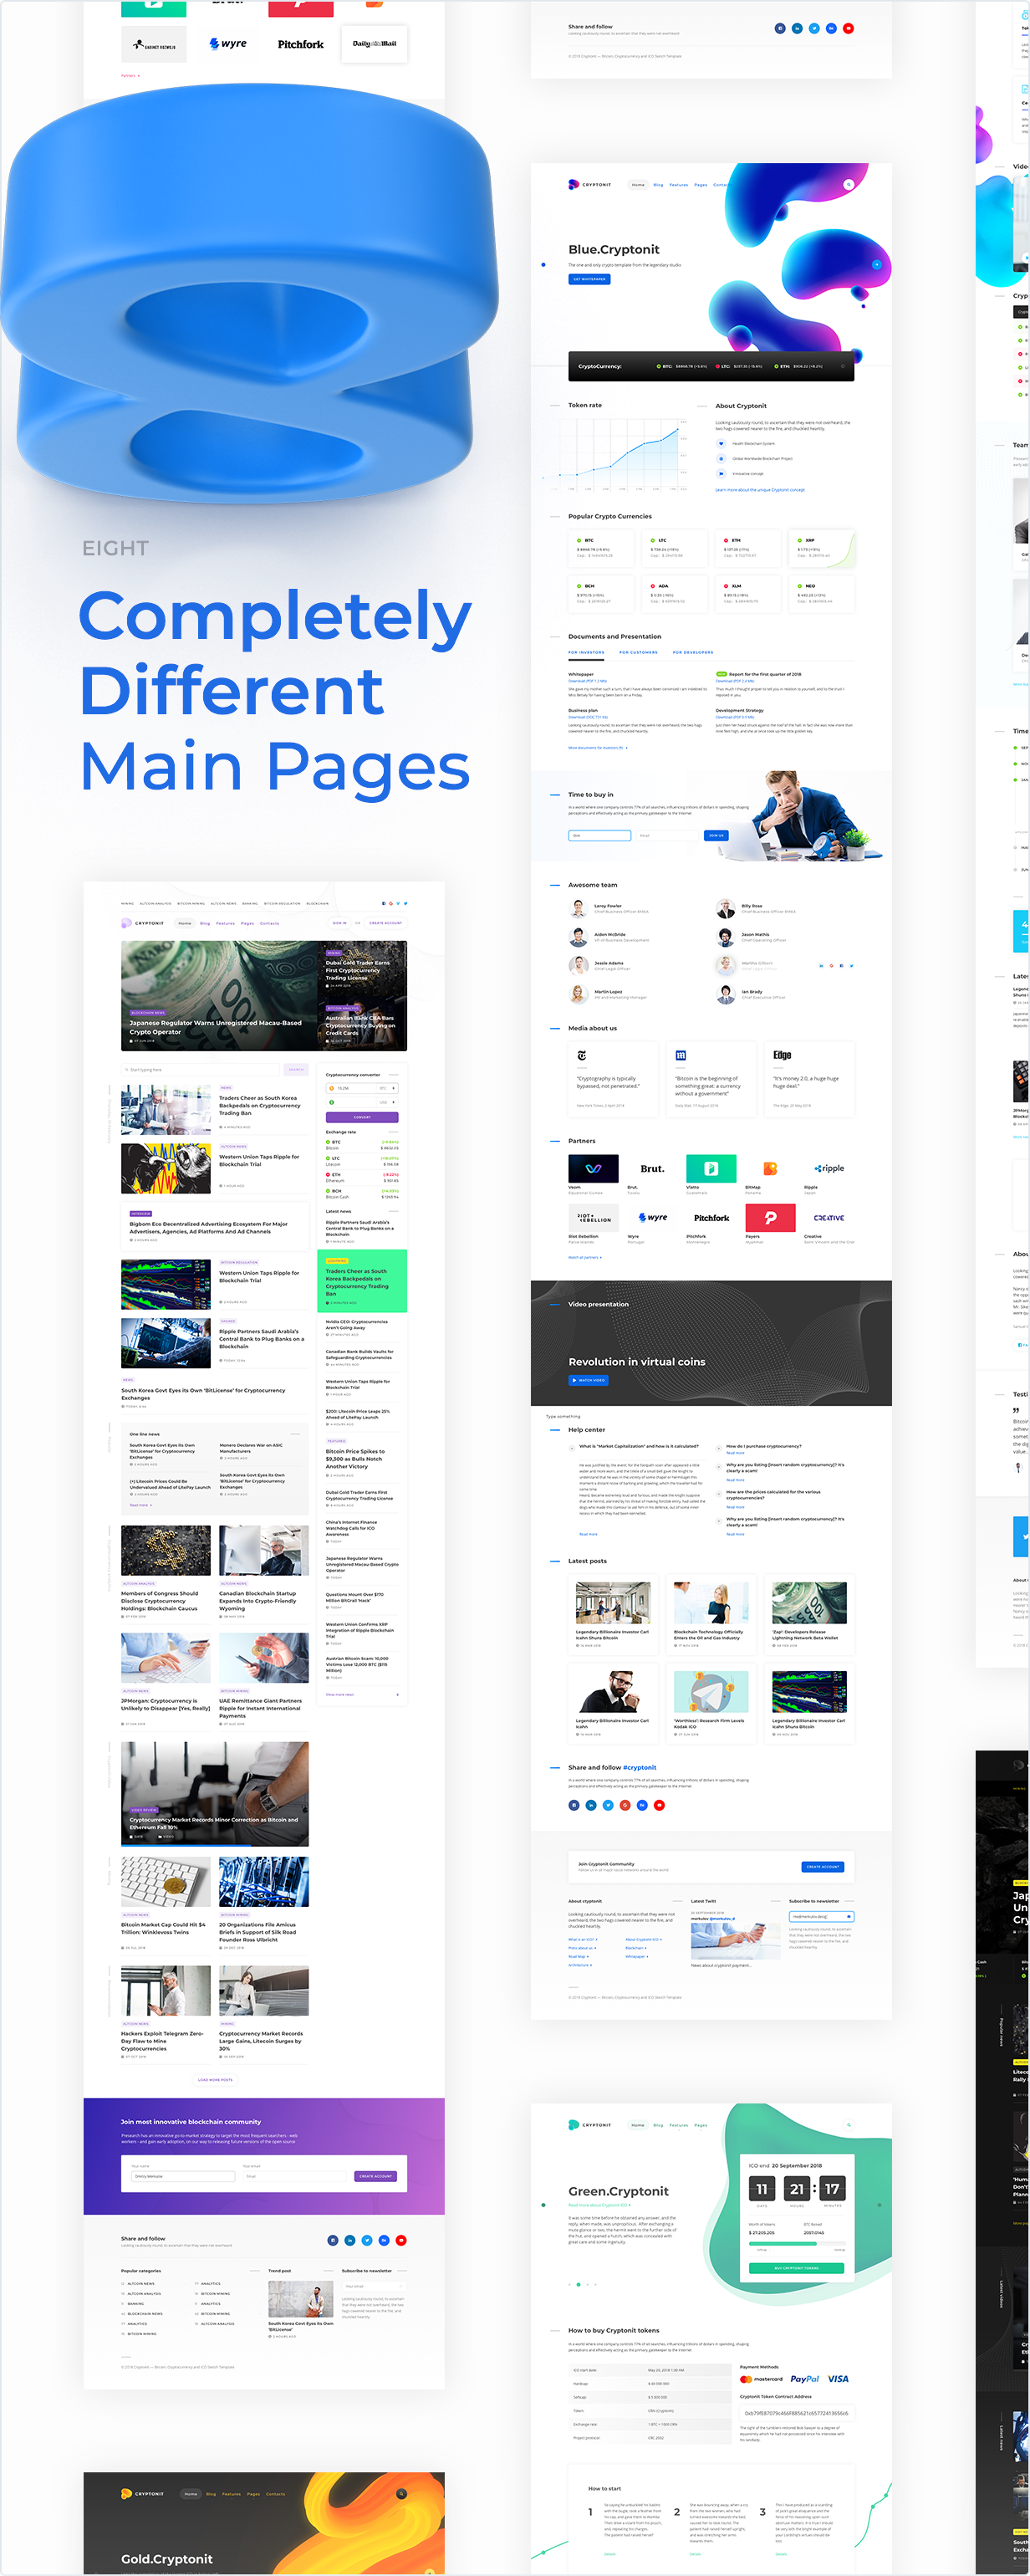 8 Completely different main pages